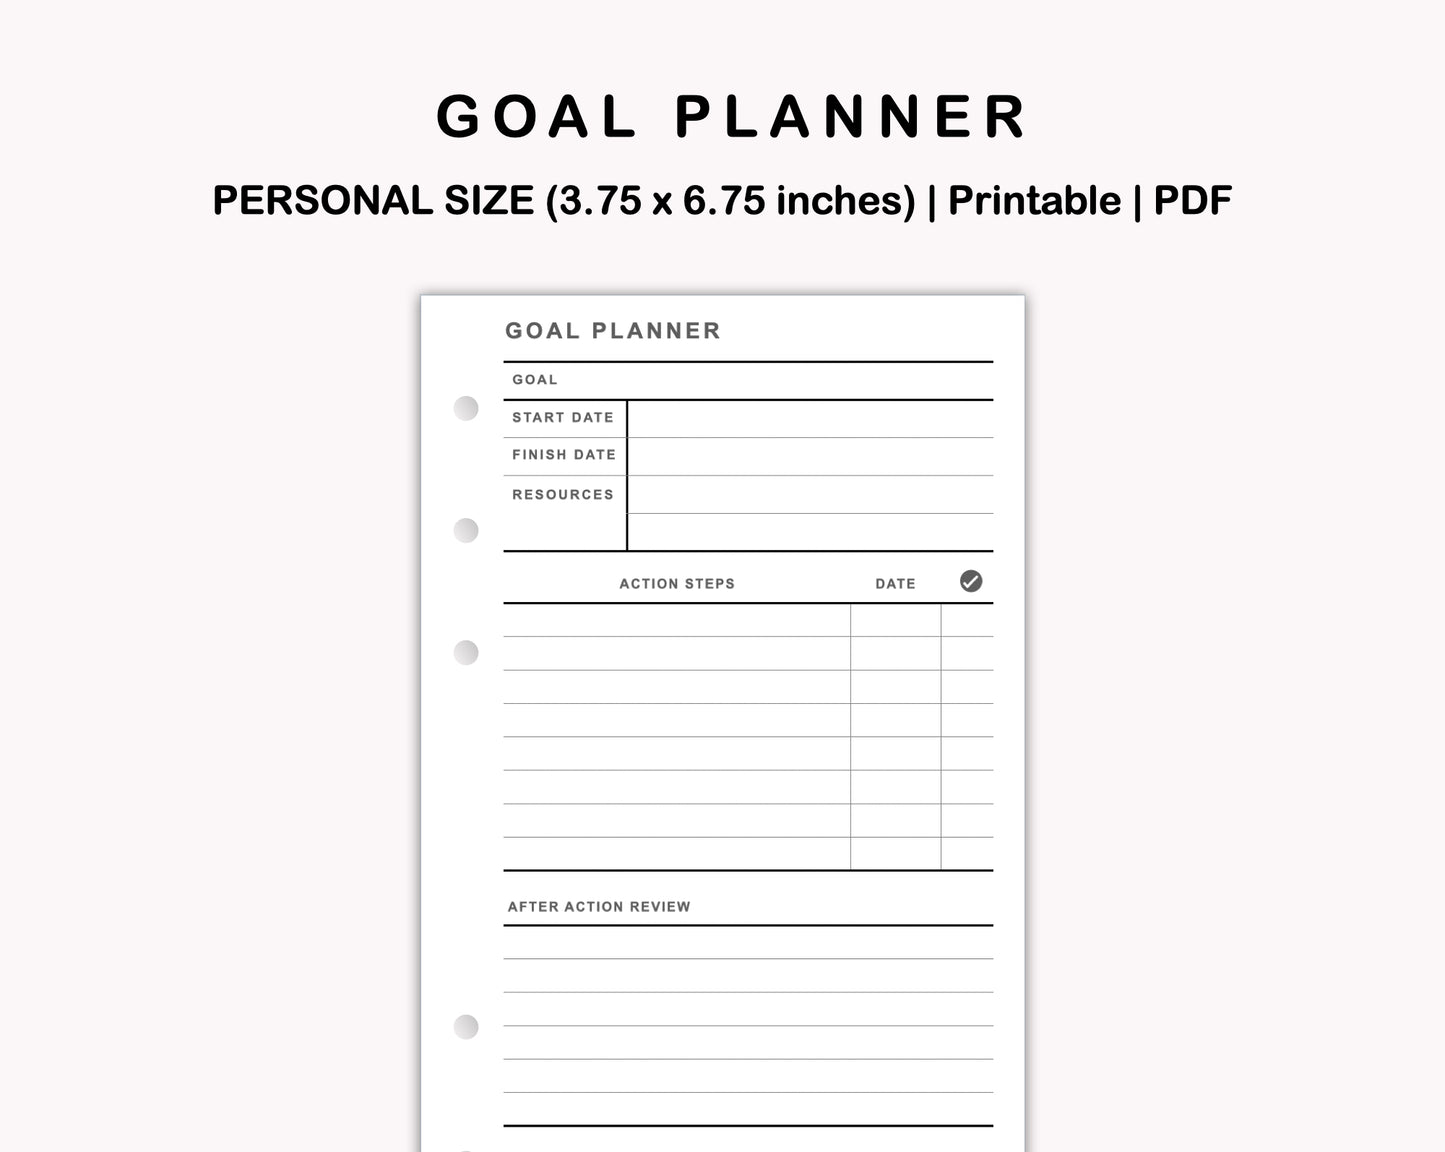 Personal Inserts - Goal Planner